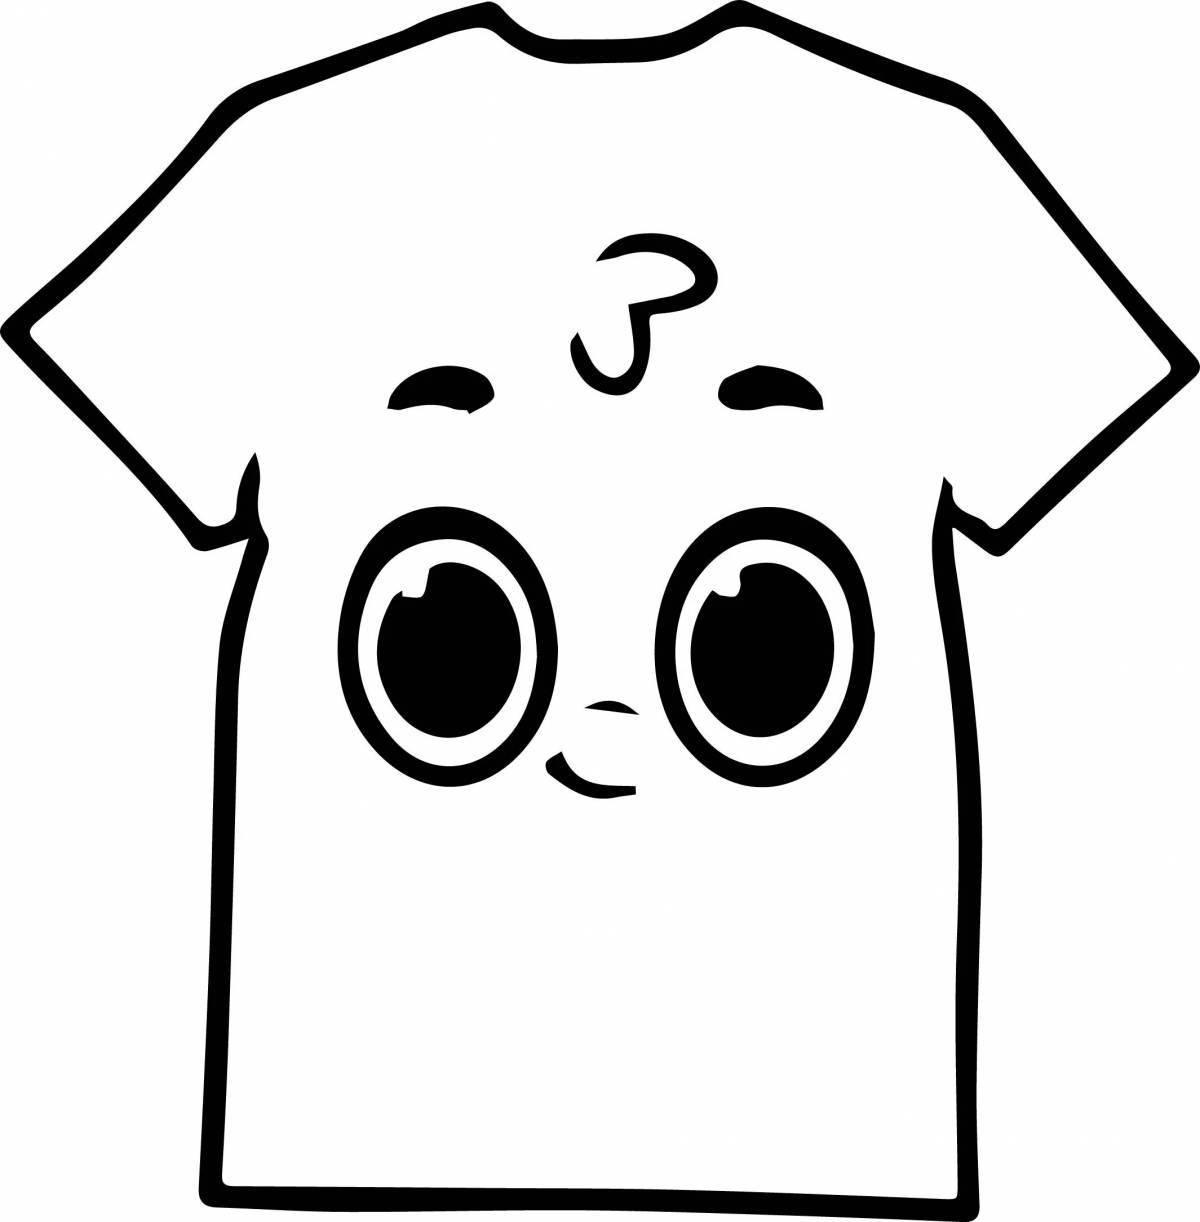 Coloring page impressive t-shirt for a boy